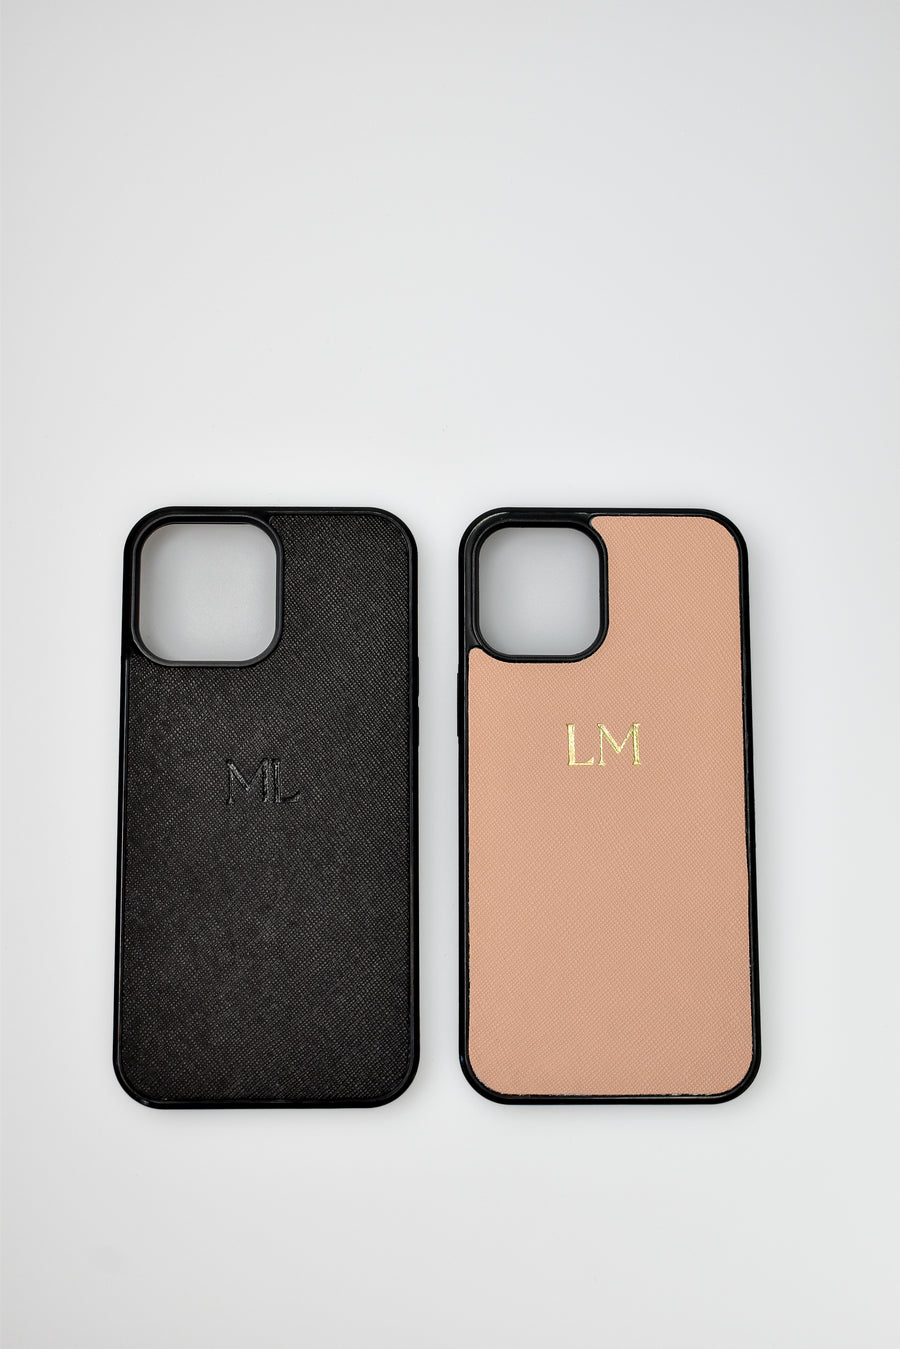 iPhone 12 Pro Max Personalised Leather Case - Black & Sandy Beige